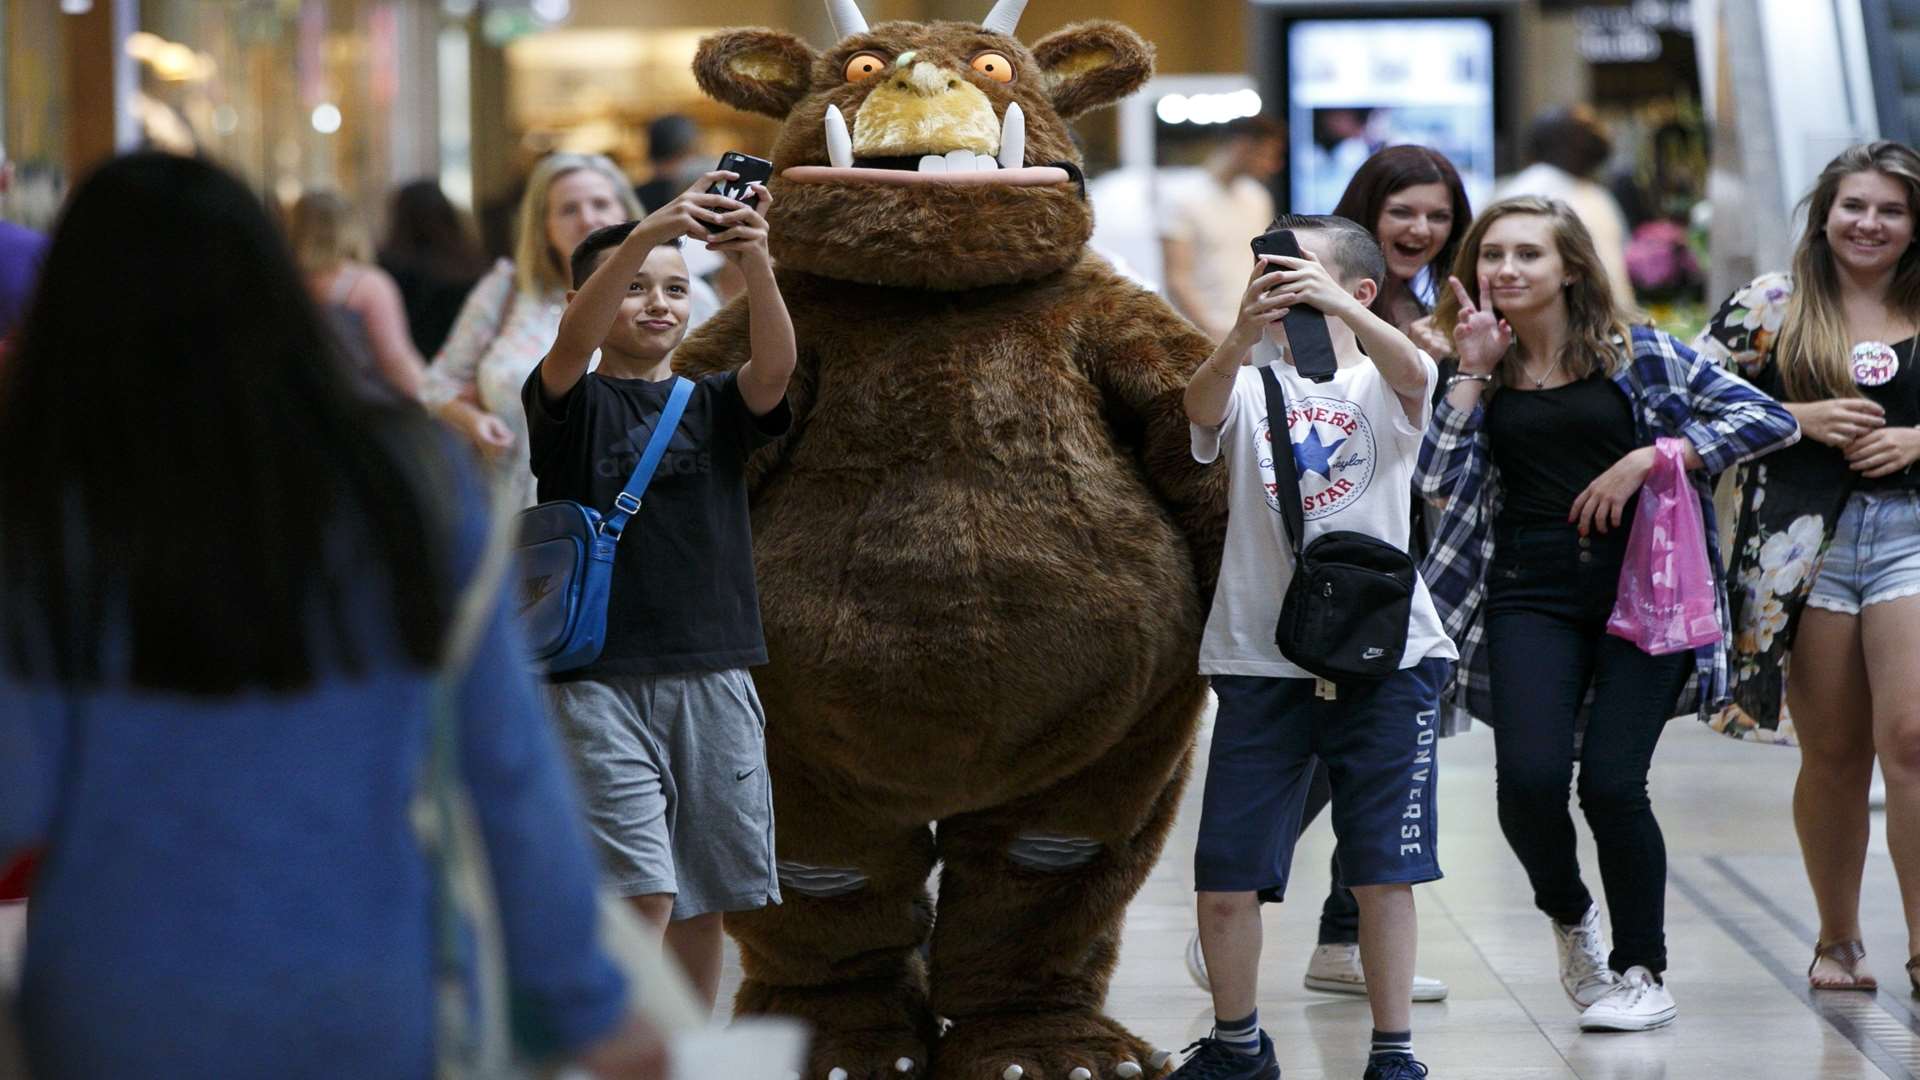 The Gruffalo mingles with shoppers in Bluewater